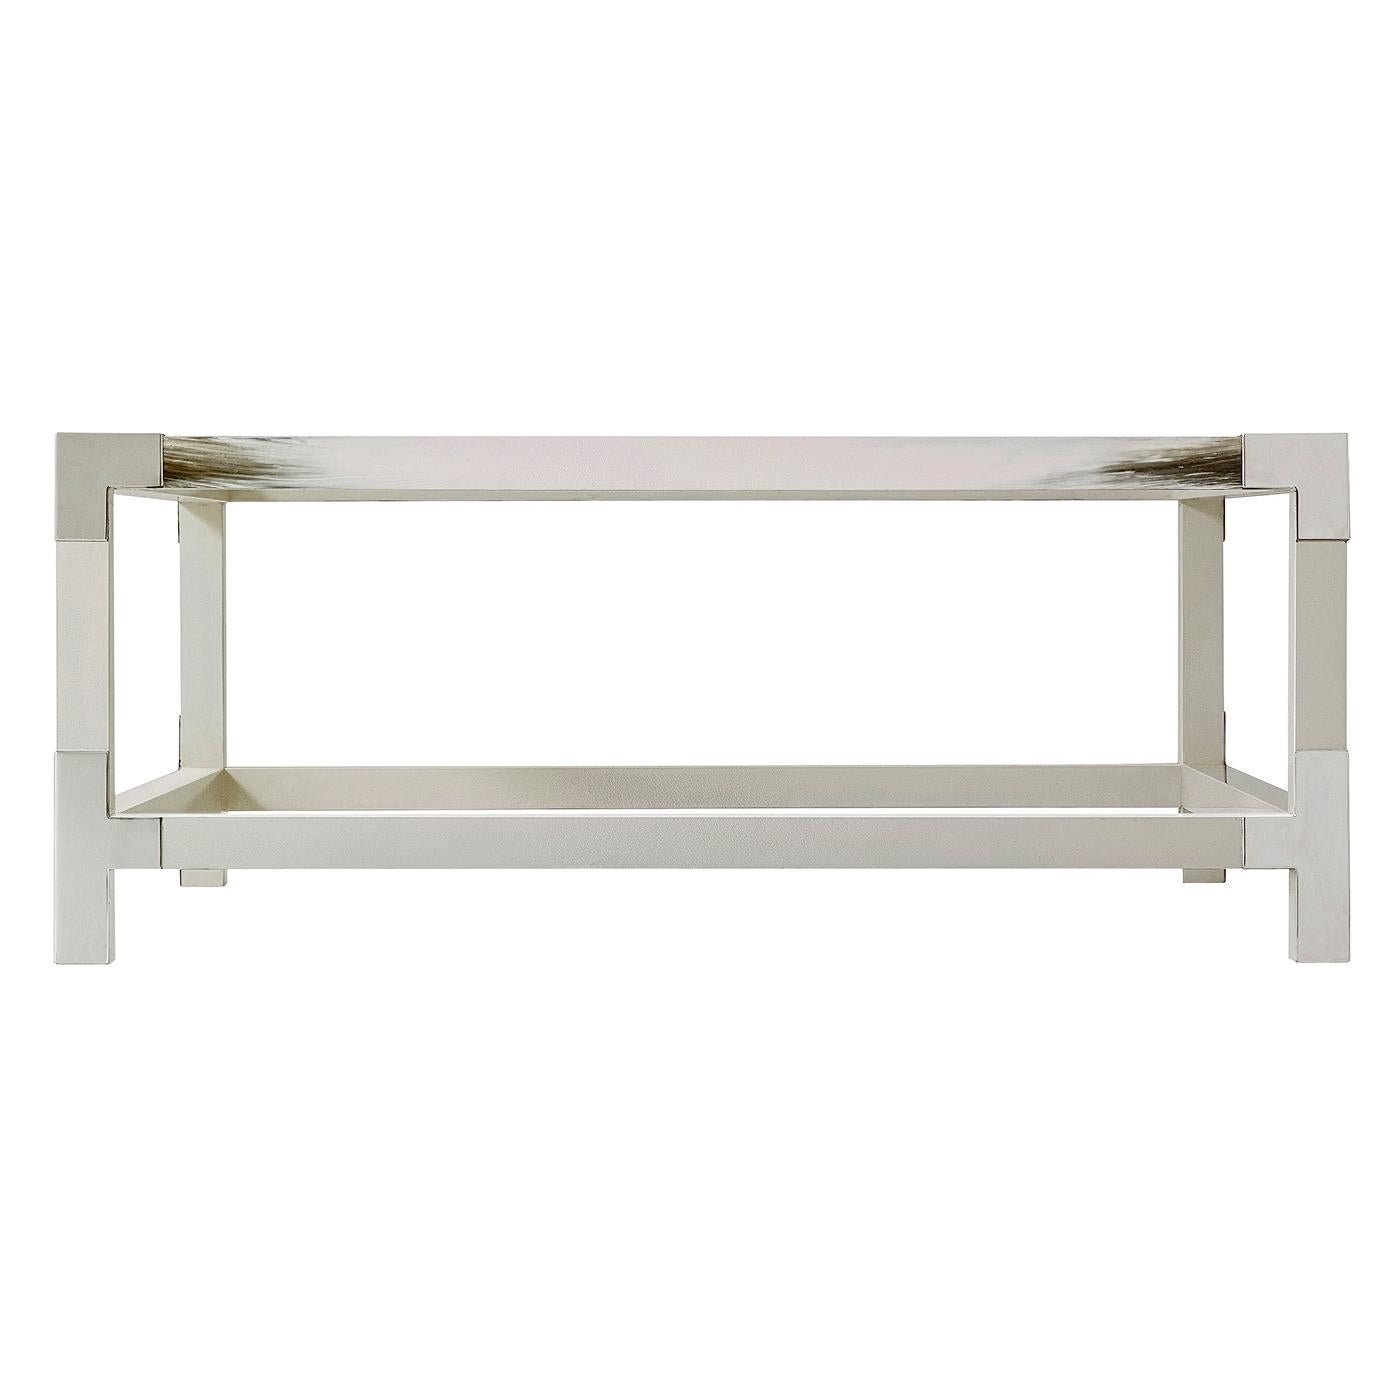 Modern hand painted faux Horn wooden frame coffee table with stainless steel edge corners and tempered glass inset top and lower shelf.
Dimensions: 44